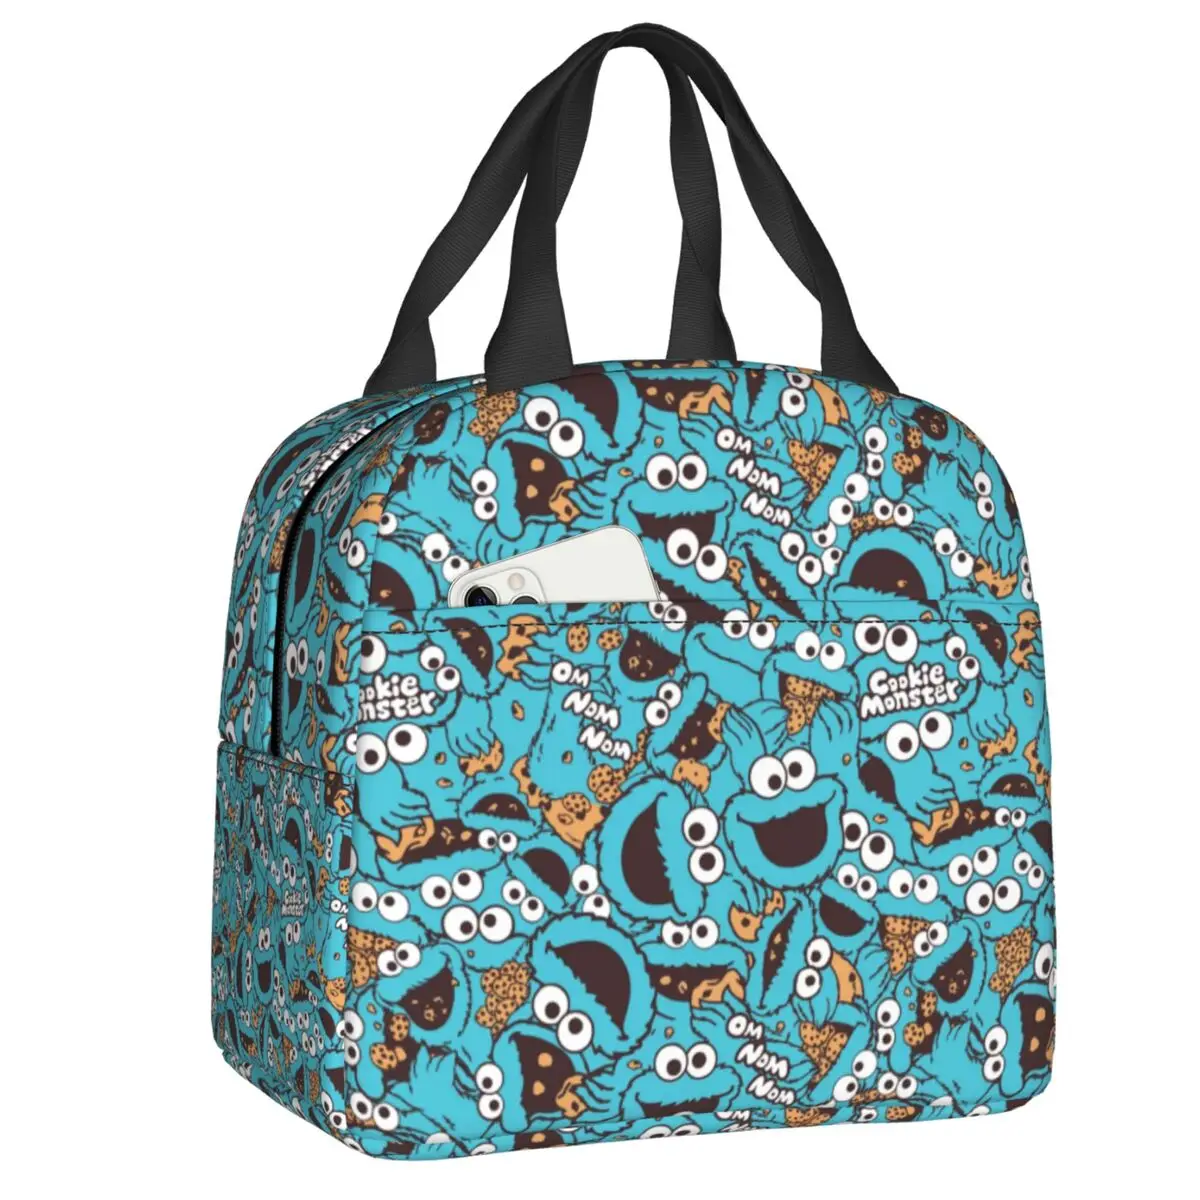 

Cookie Monster Insulated Lunch Tote Bag Cartoon Sesame Street Resuable Cooler Thermal Food Lunch Box Kids School Children